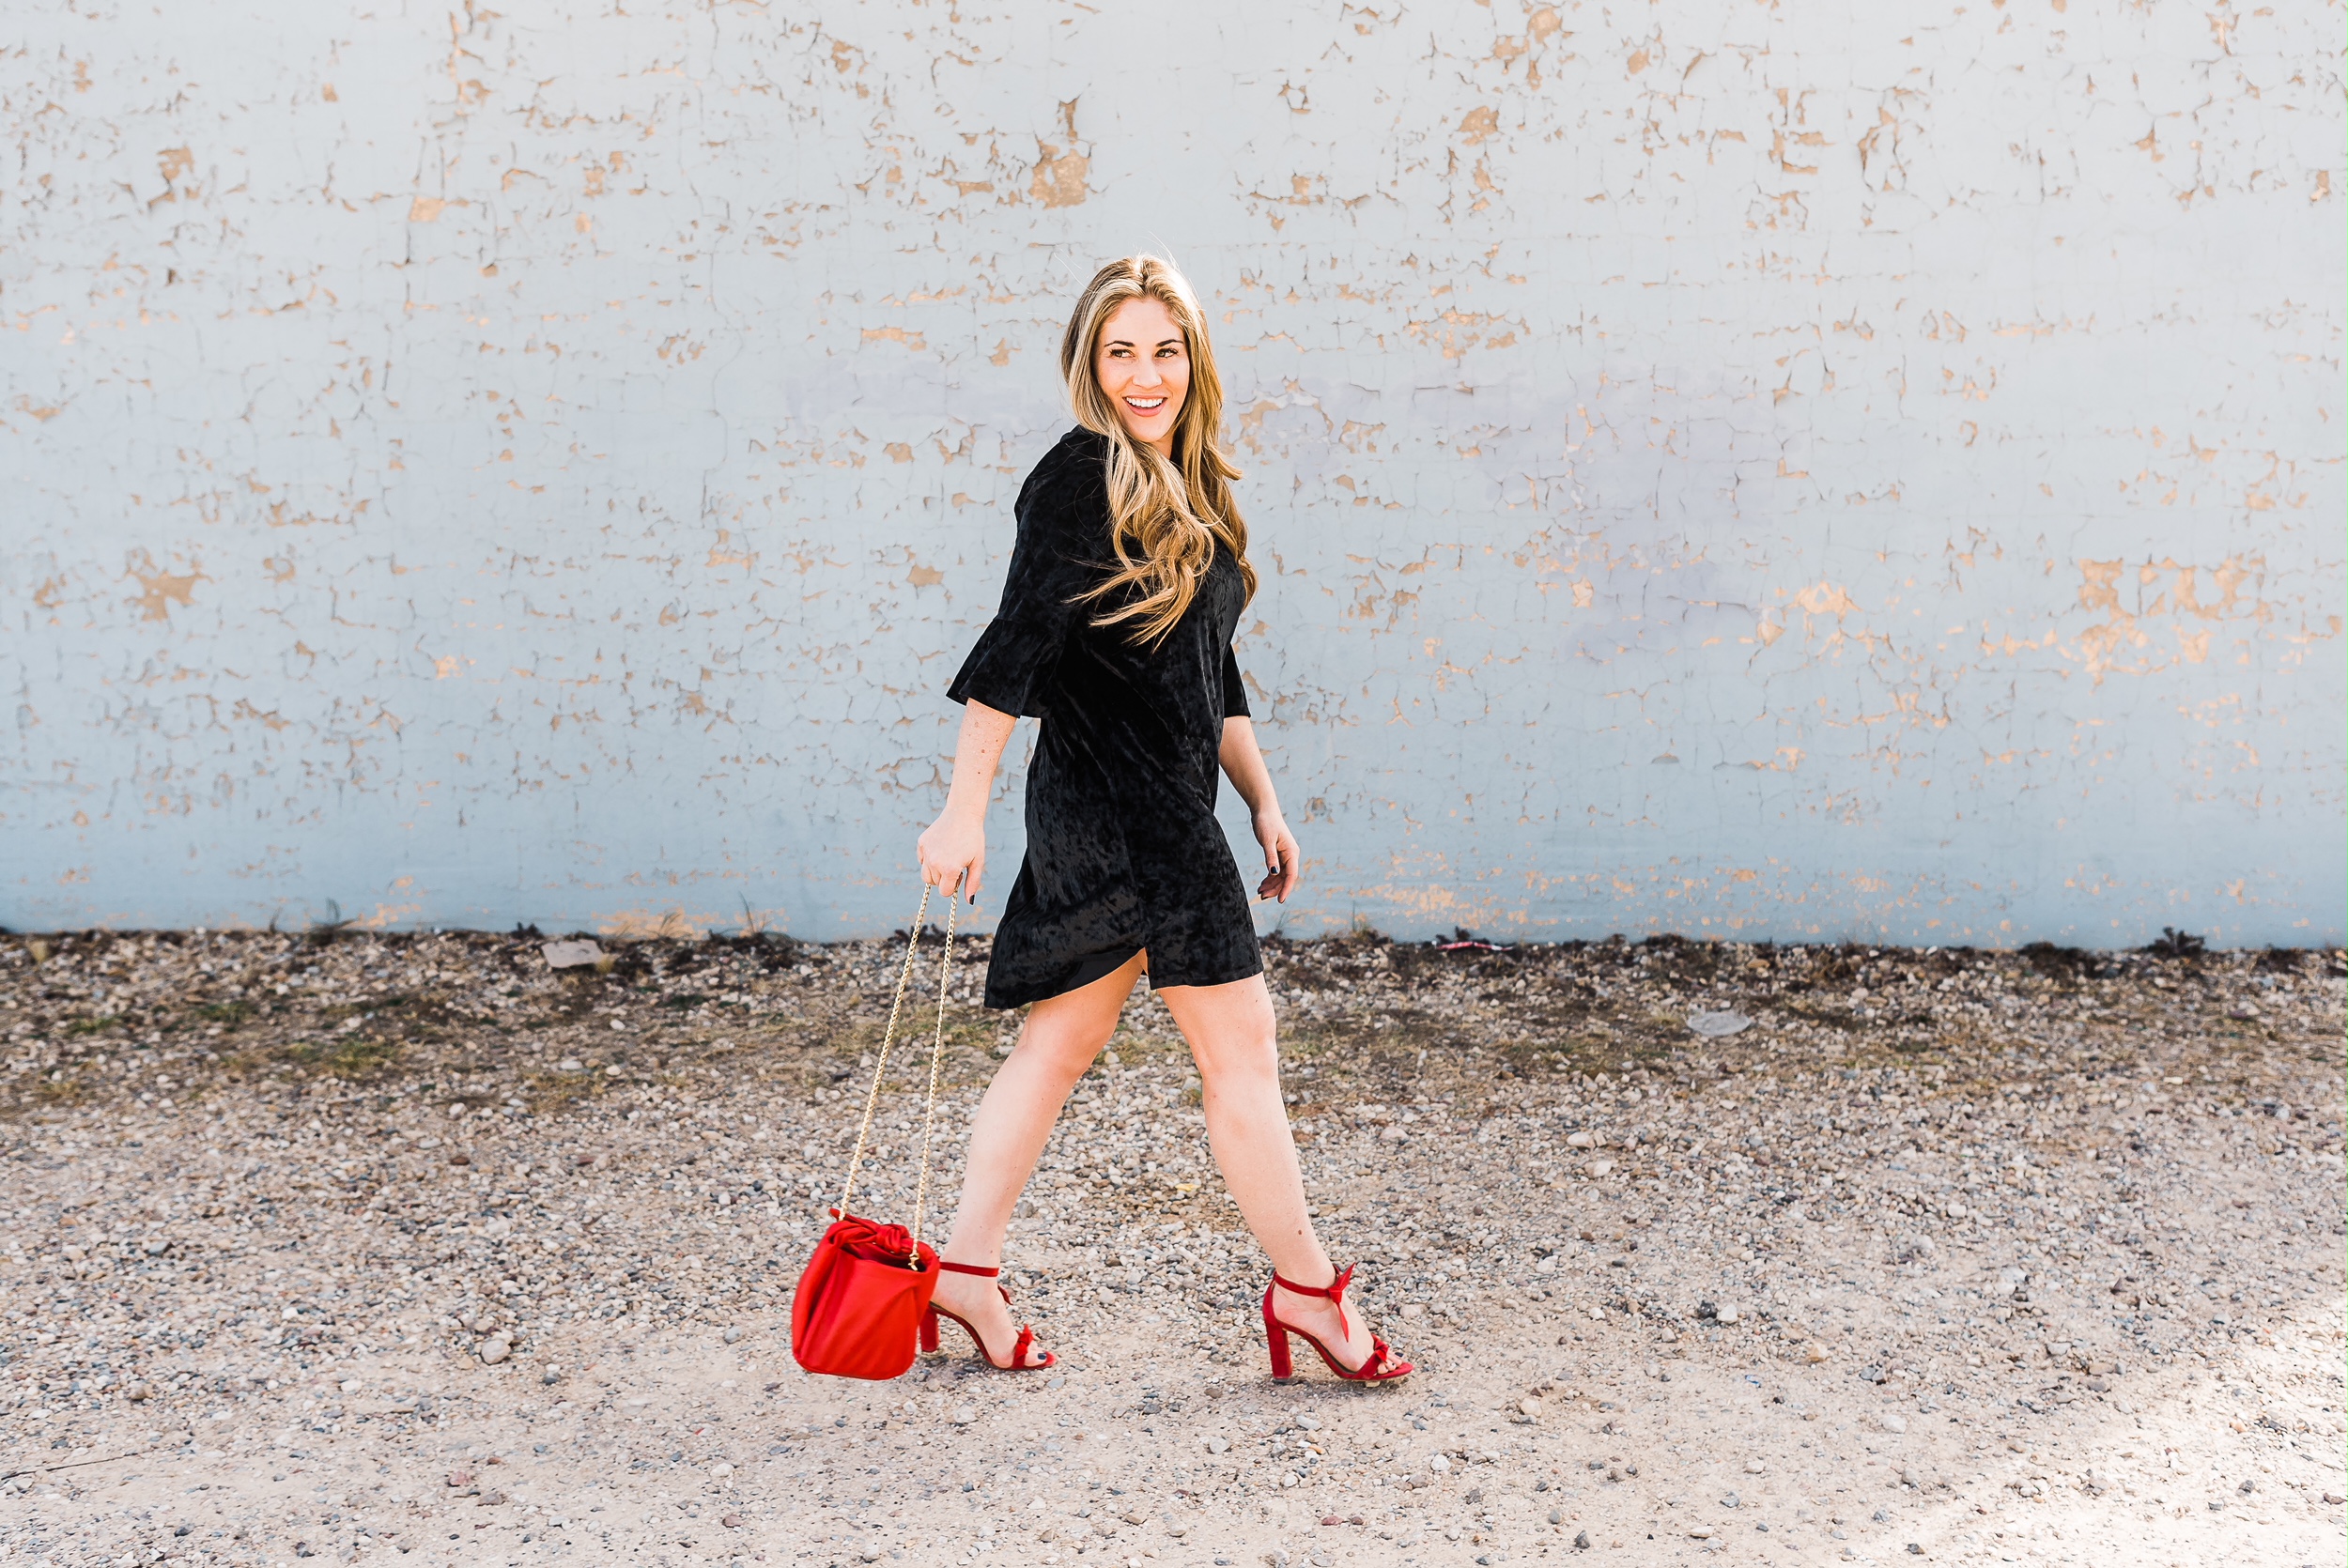 How to Add Red Accessories for the Perfect Valentine's Day Look by East Memphis fashion blogger Walking in Memphis in High Heels